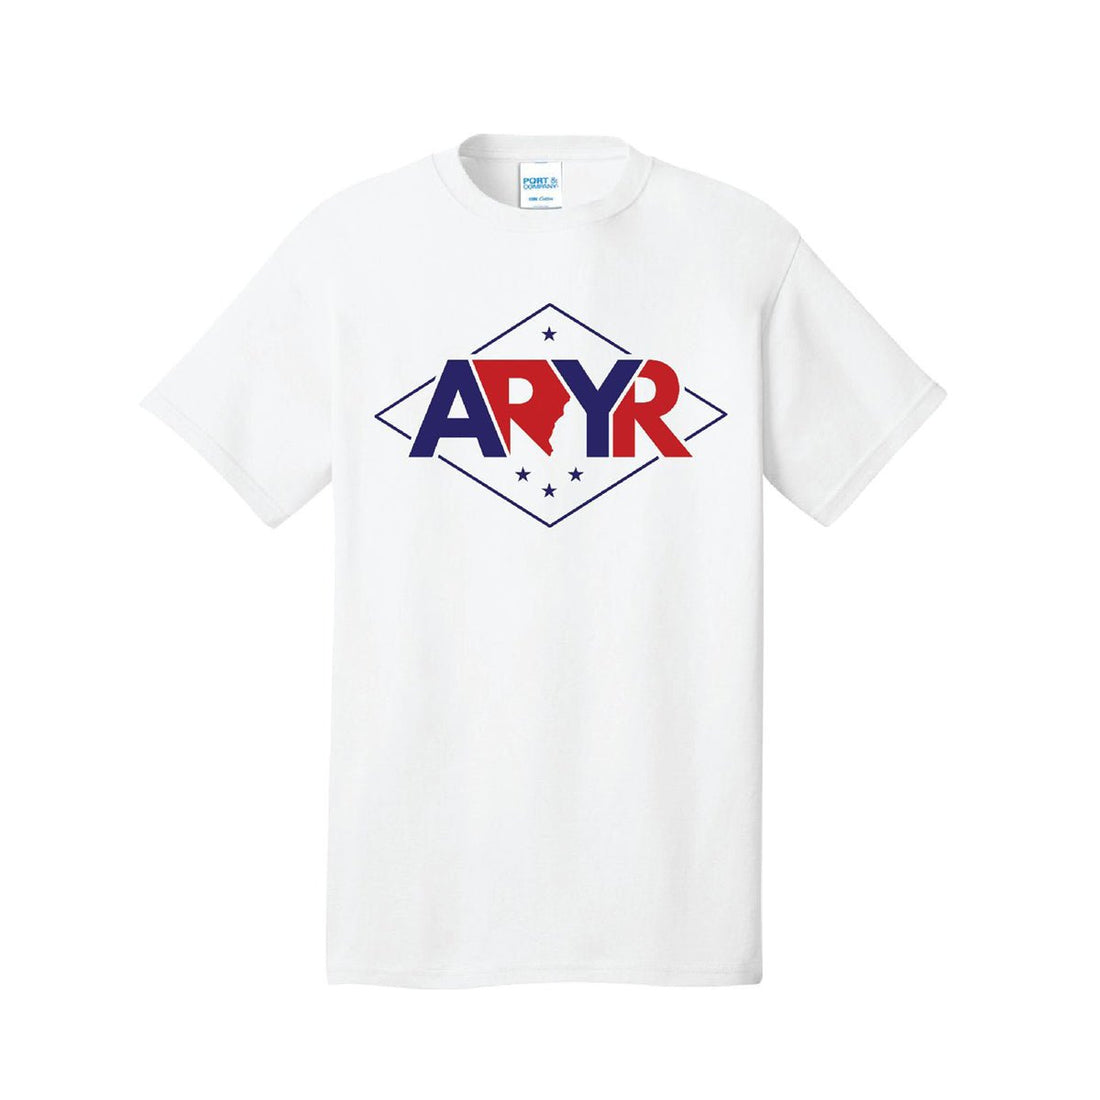 Direct To Film (DTF) Printed "ARYR" Young Republicans T Shirt - ATOM Promotions